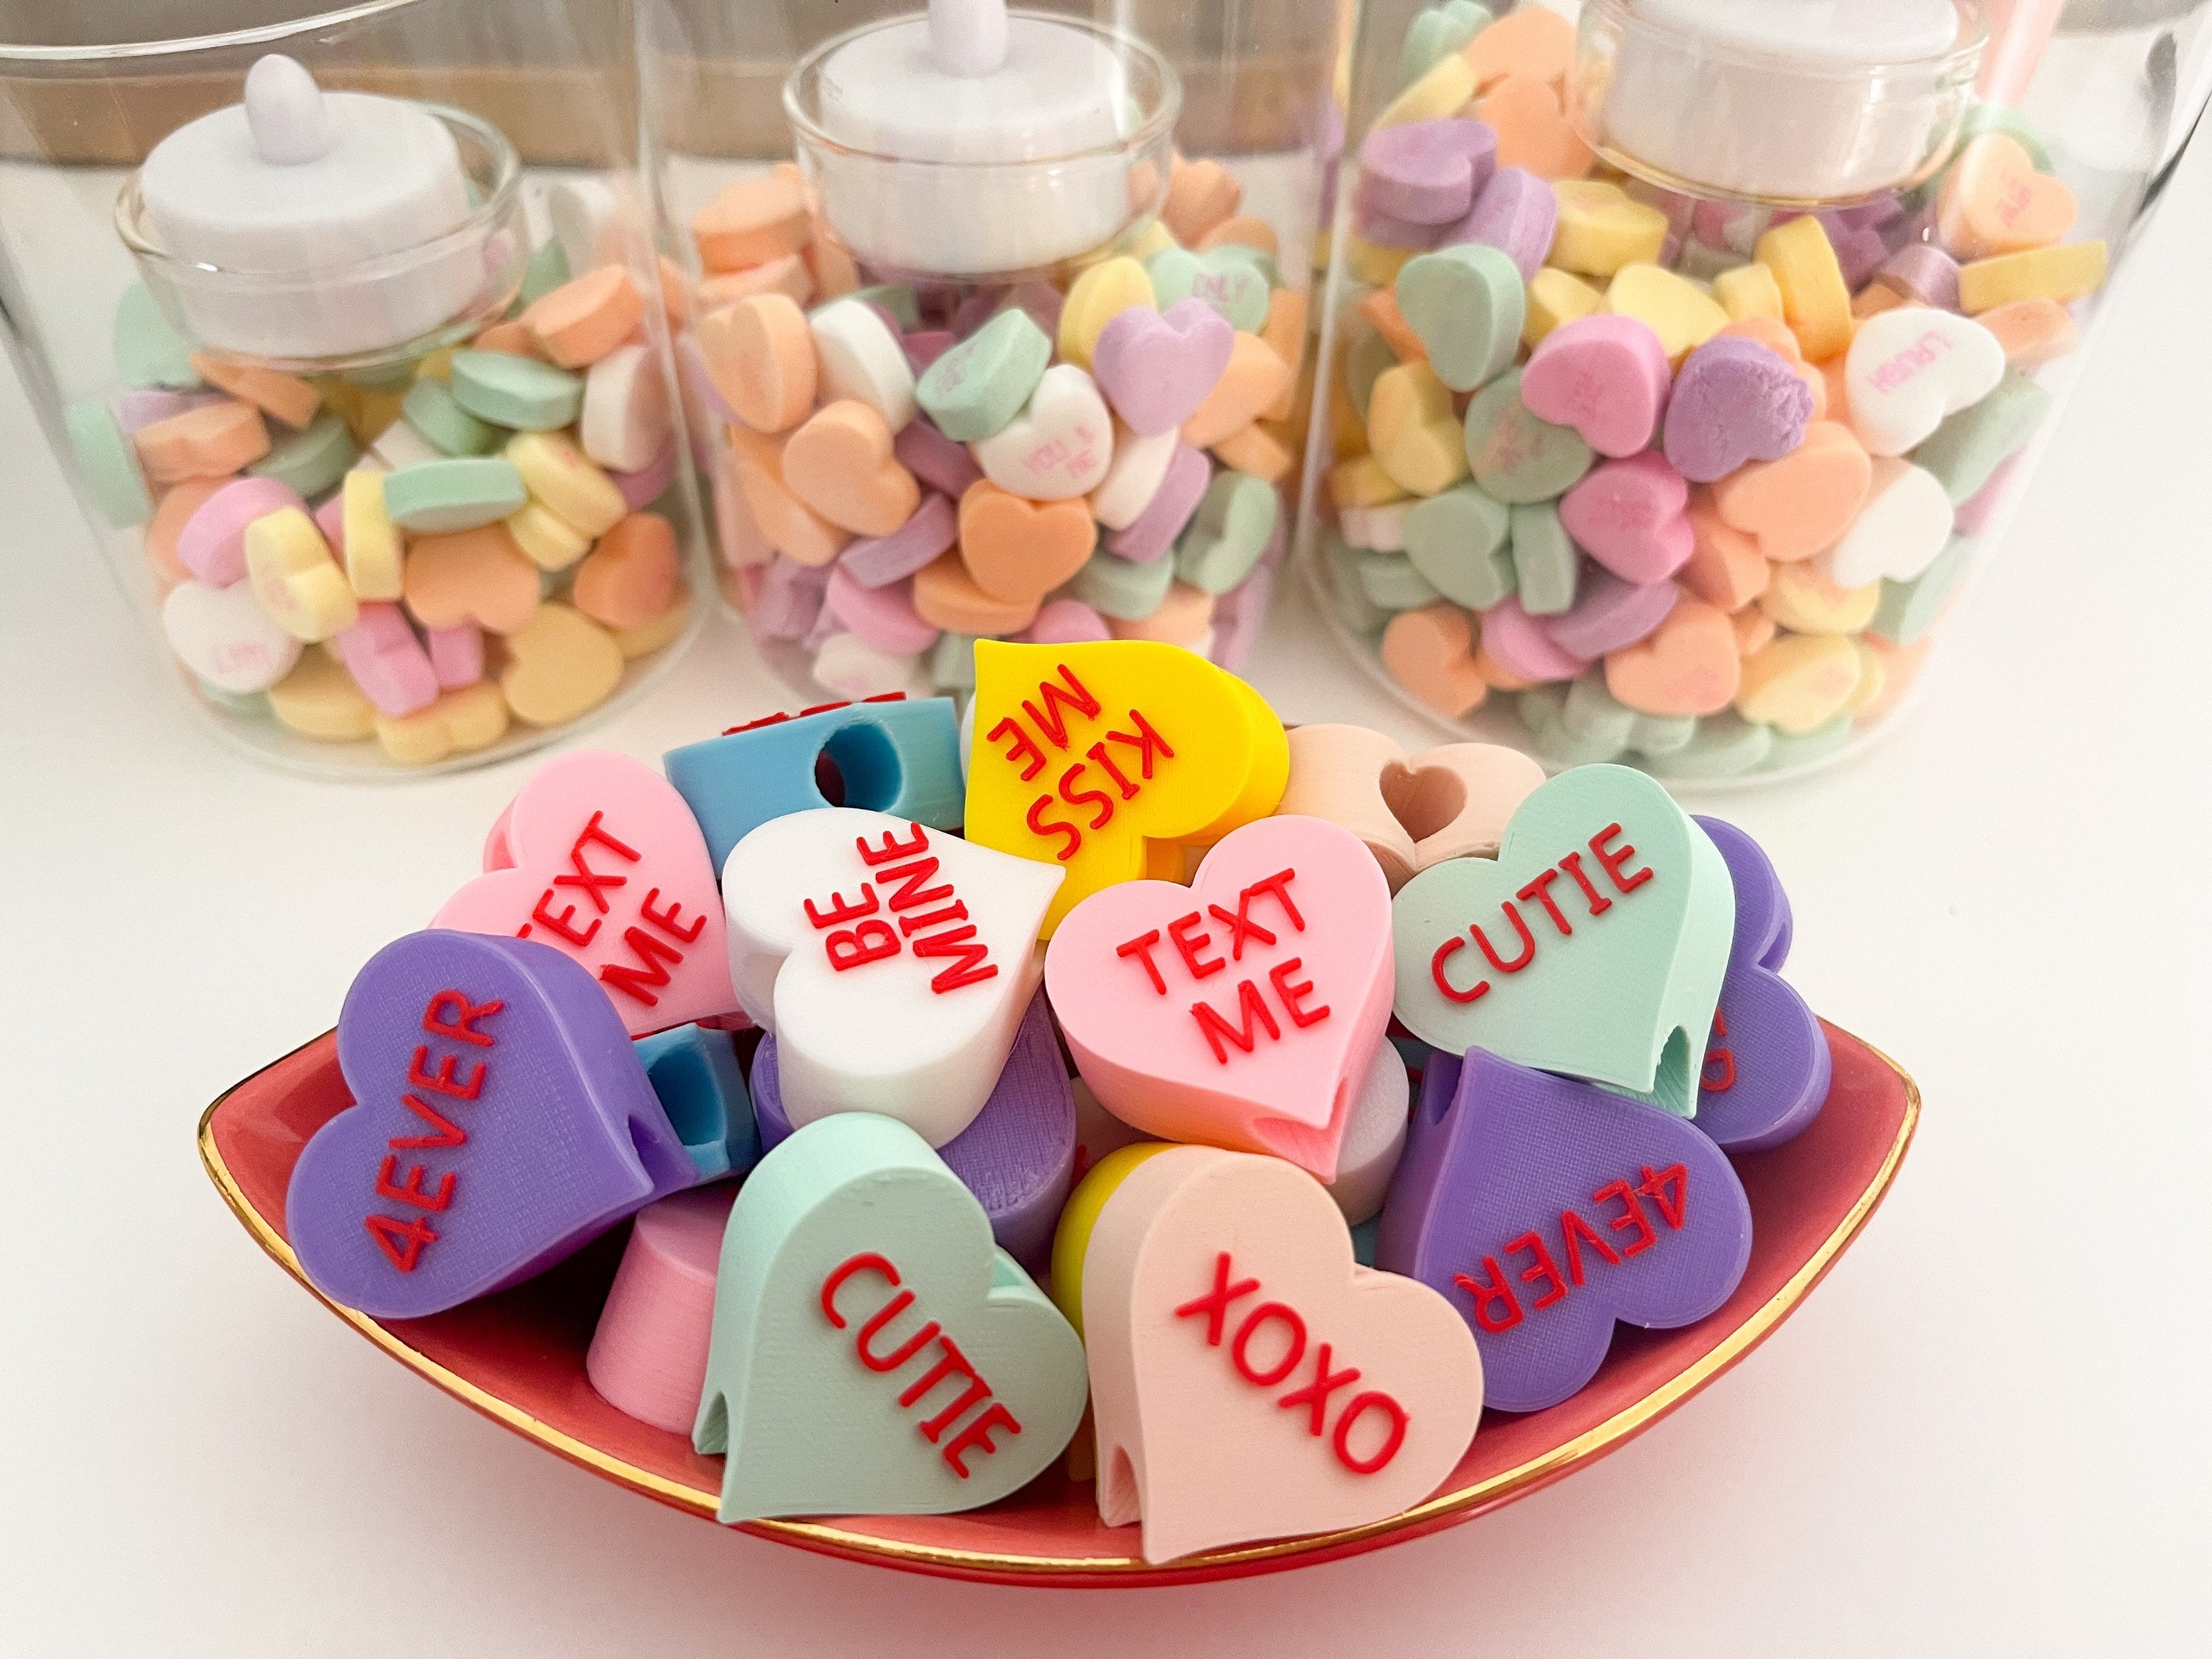 Concha Heart Straw Toppers – Creating Attention